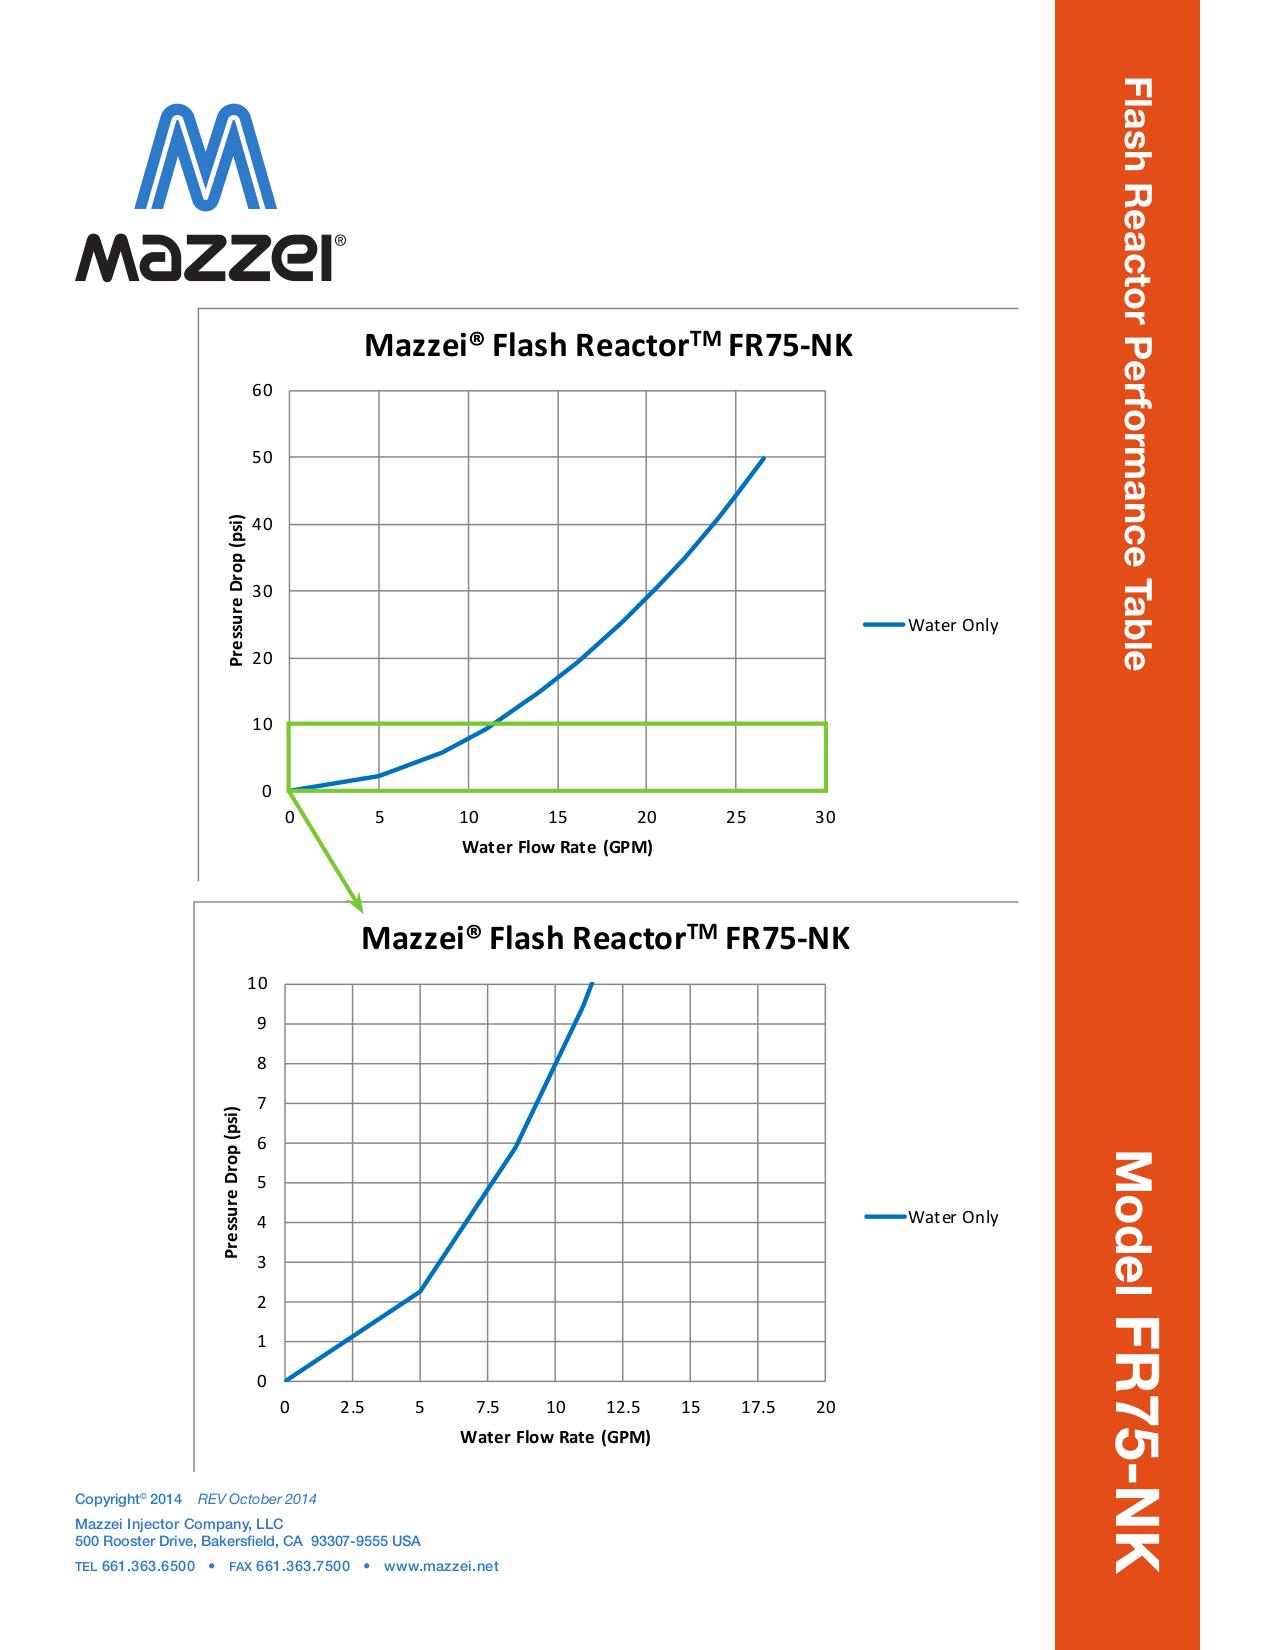 Performance Data for the FR-75-NK Flash Reactor